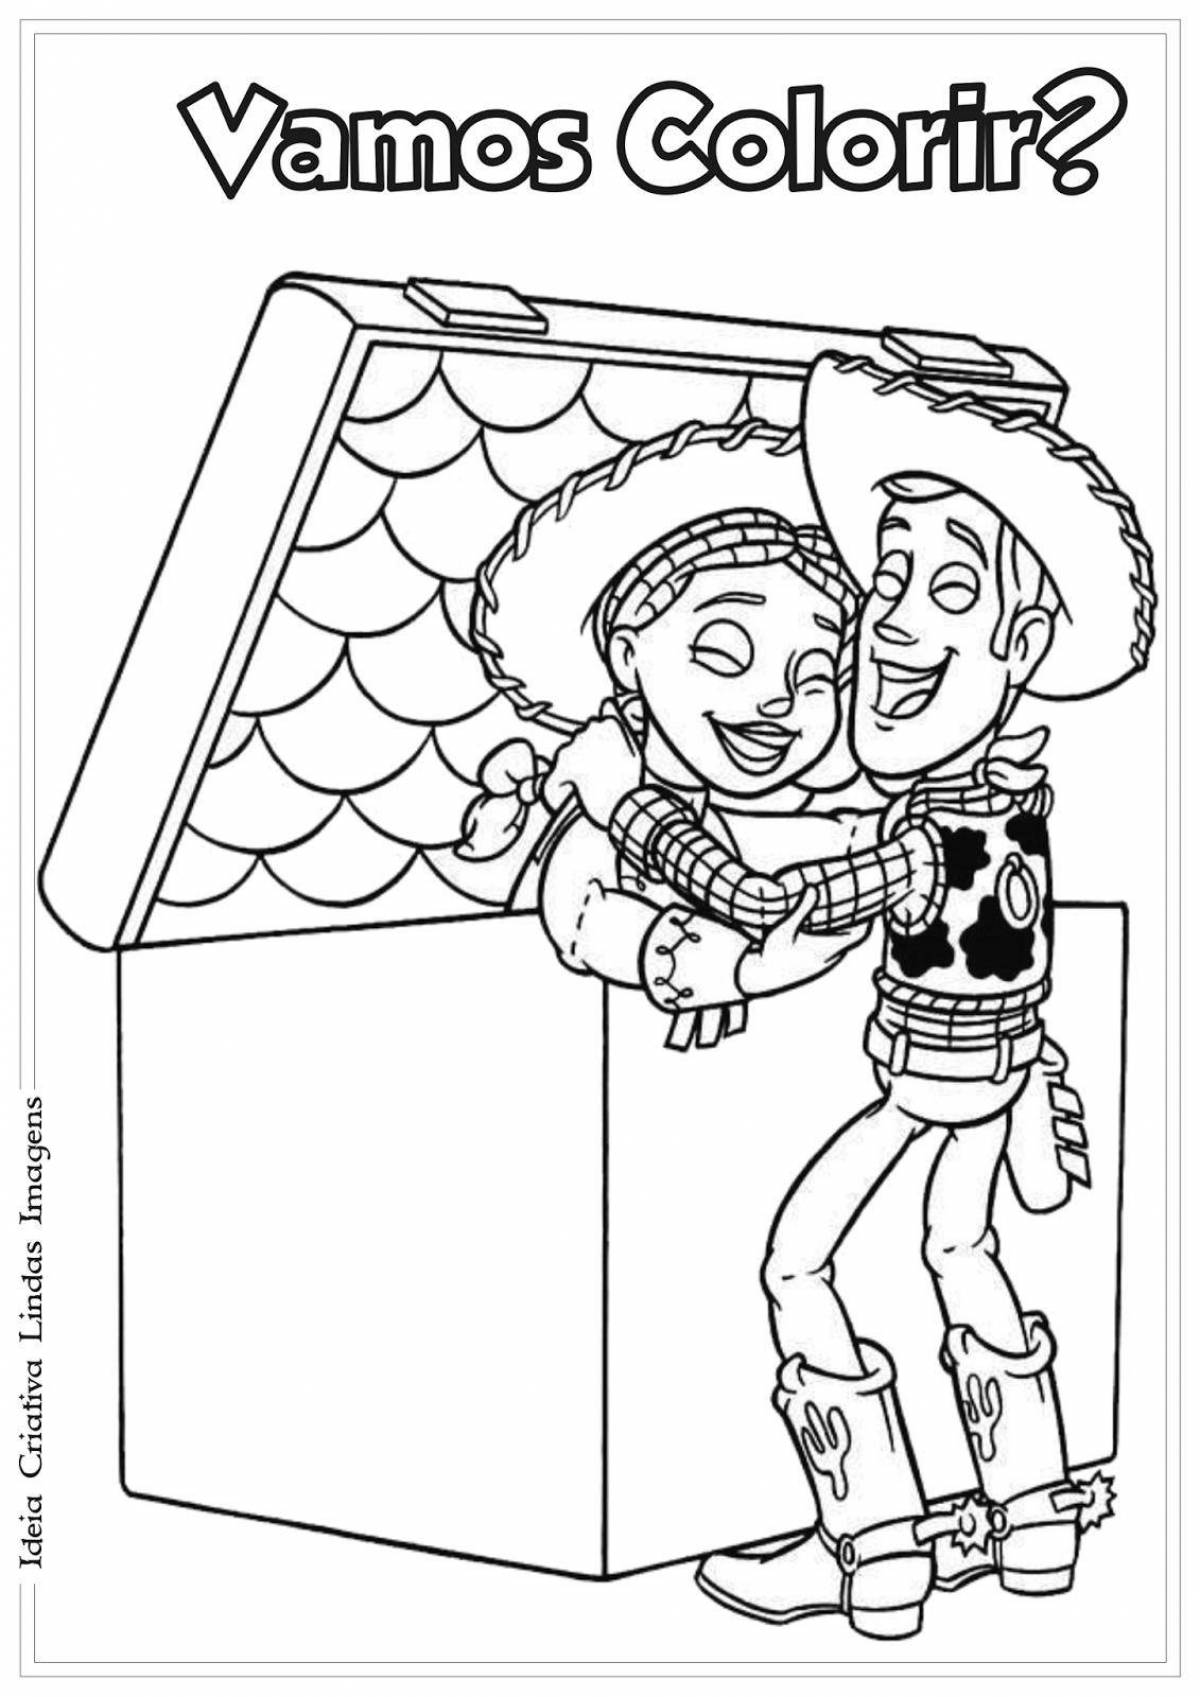 Jessie's toy story coloring book